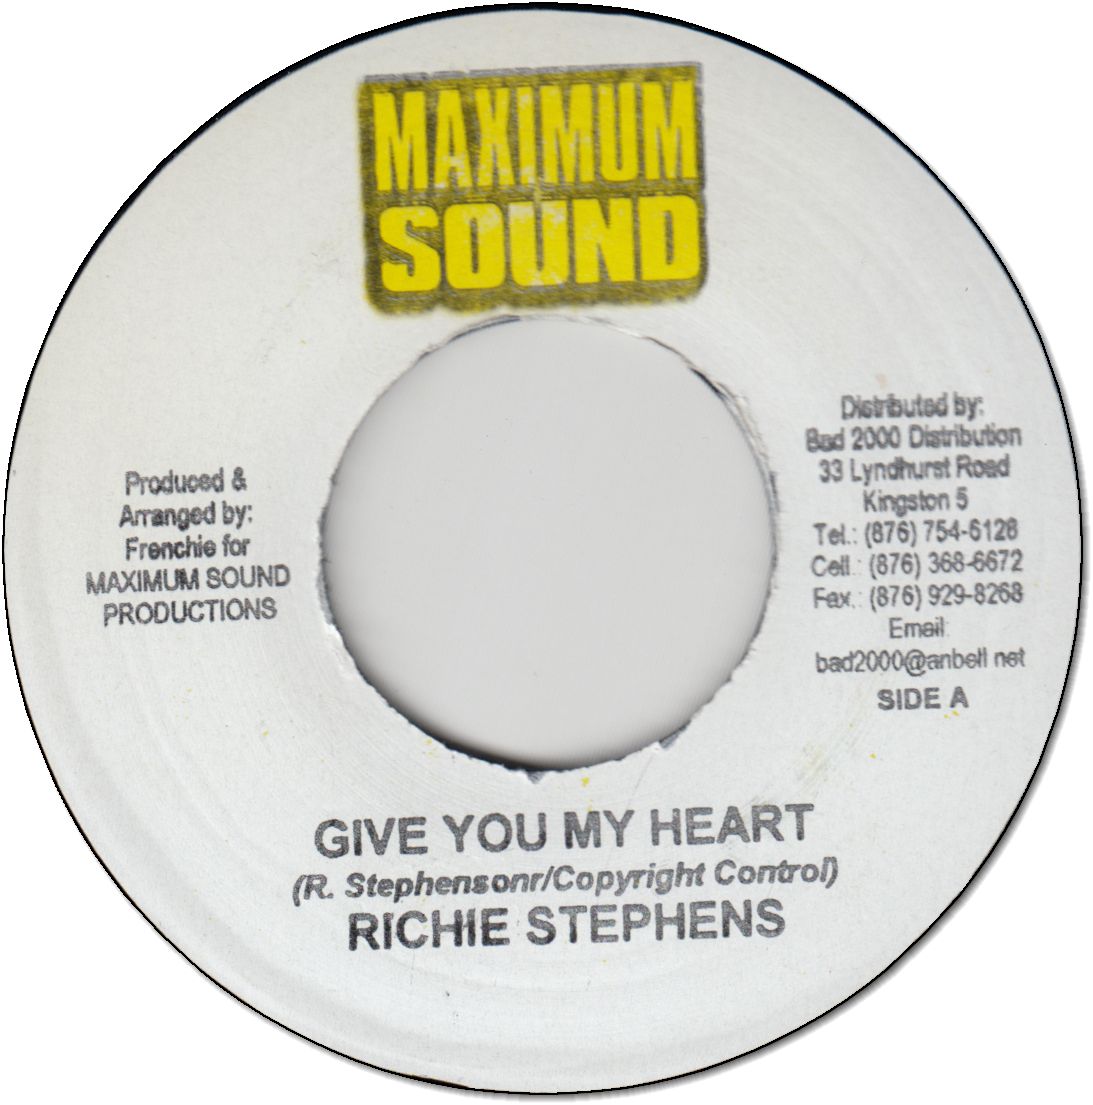 GIVE YOU MY HEART (VG+)